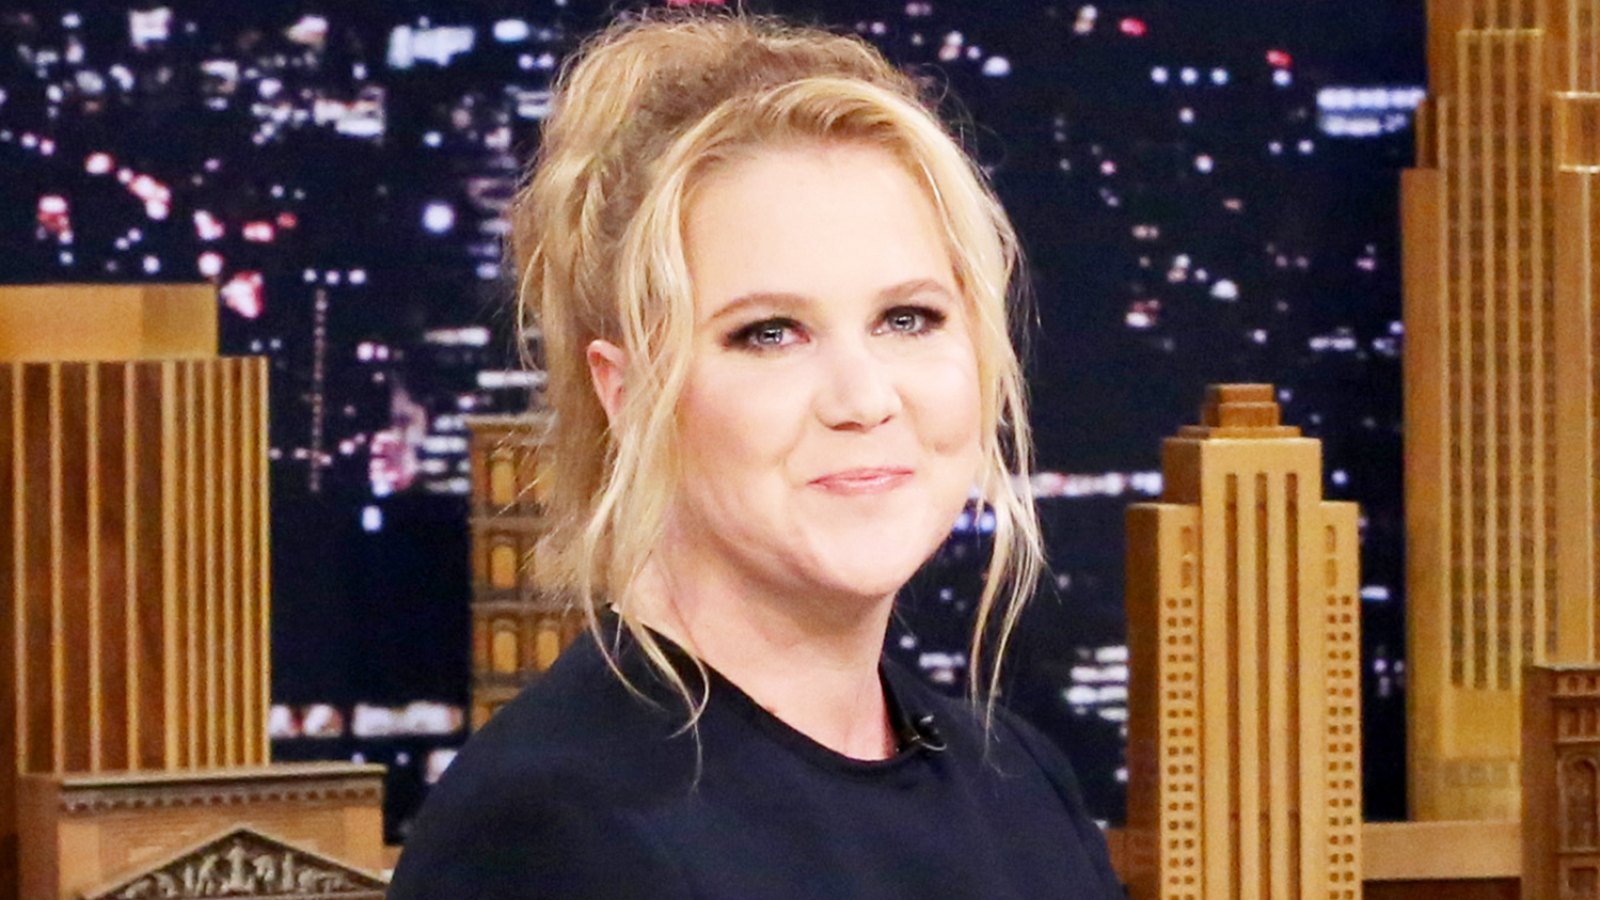 Amy Schumer on April 12, 2016